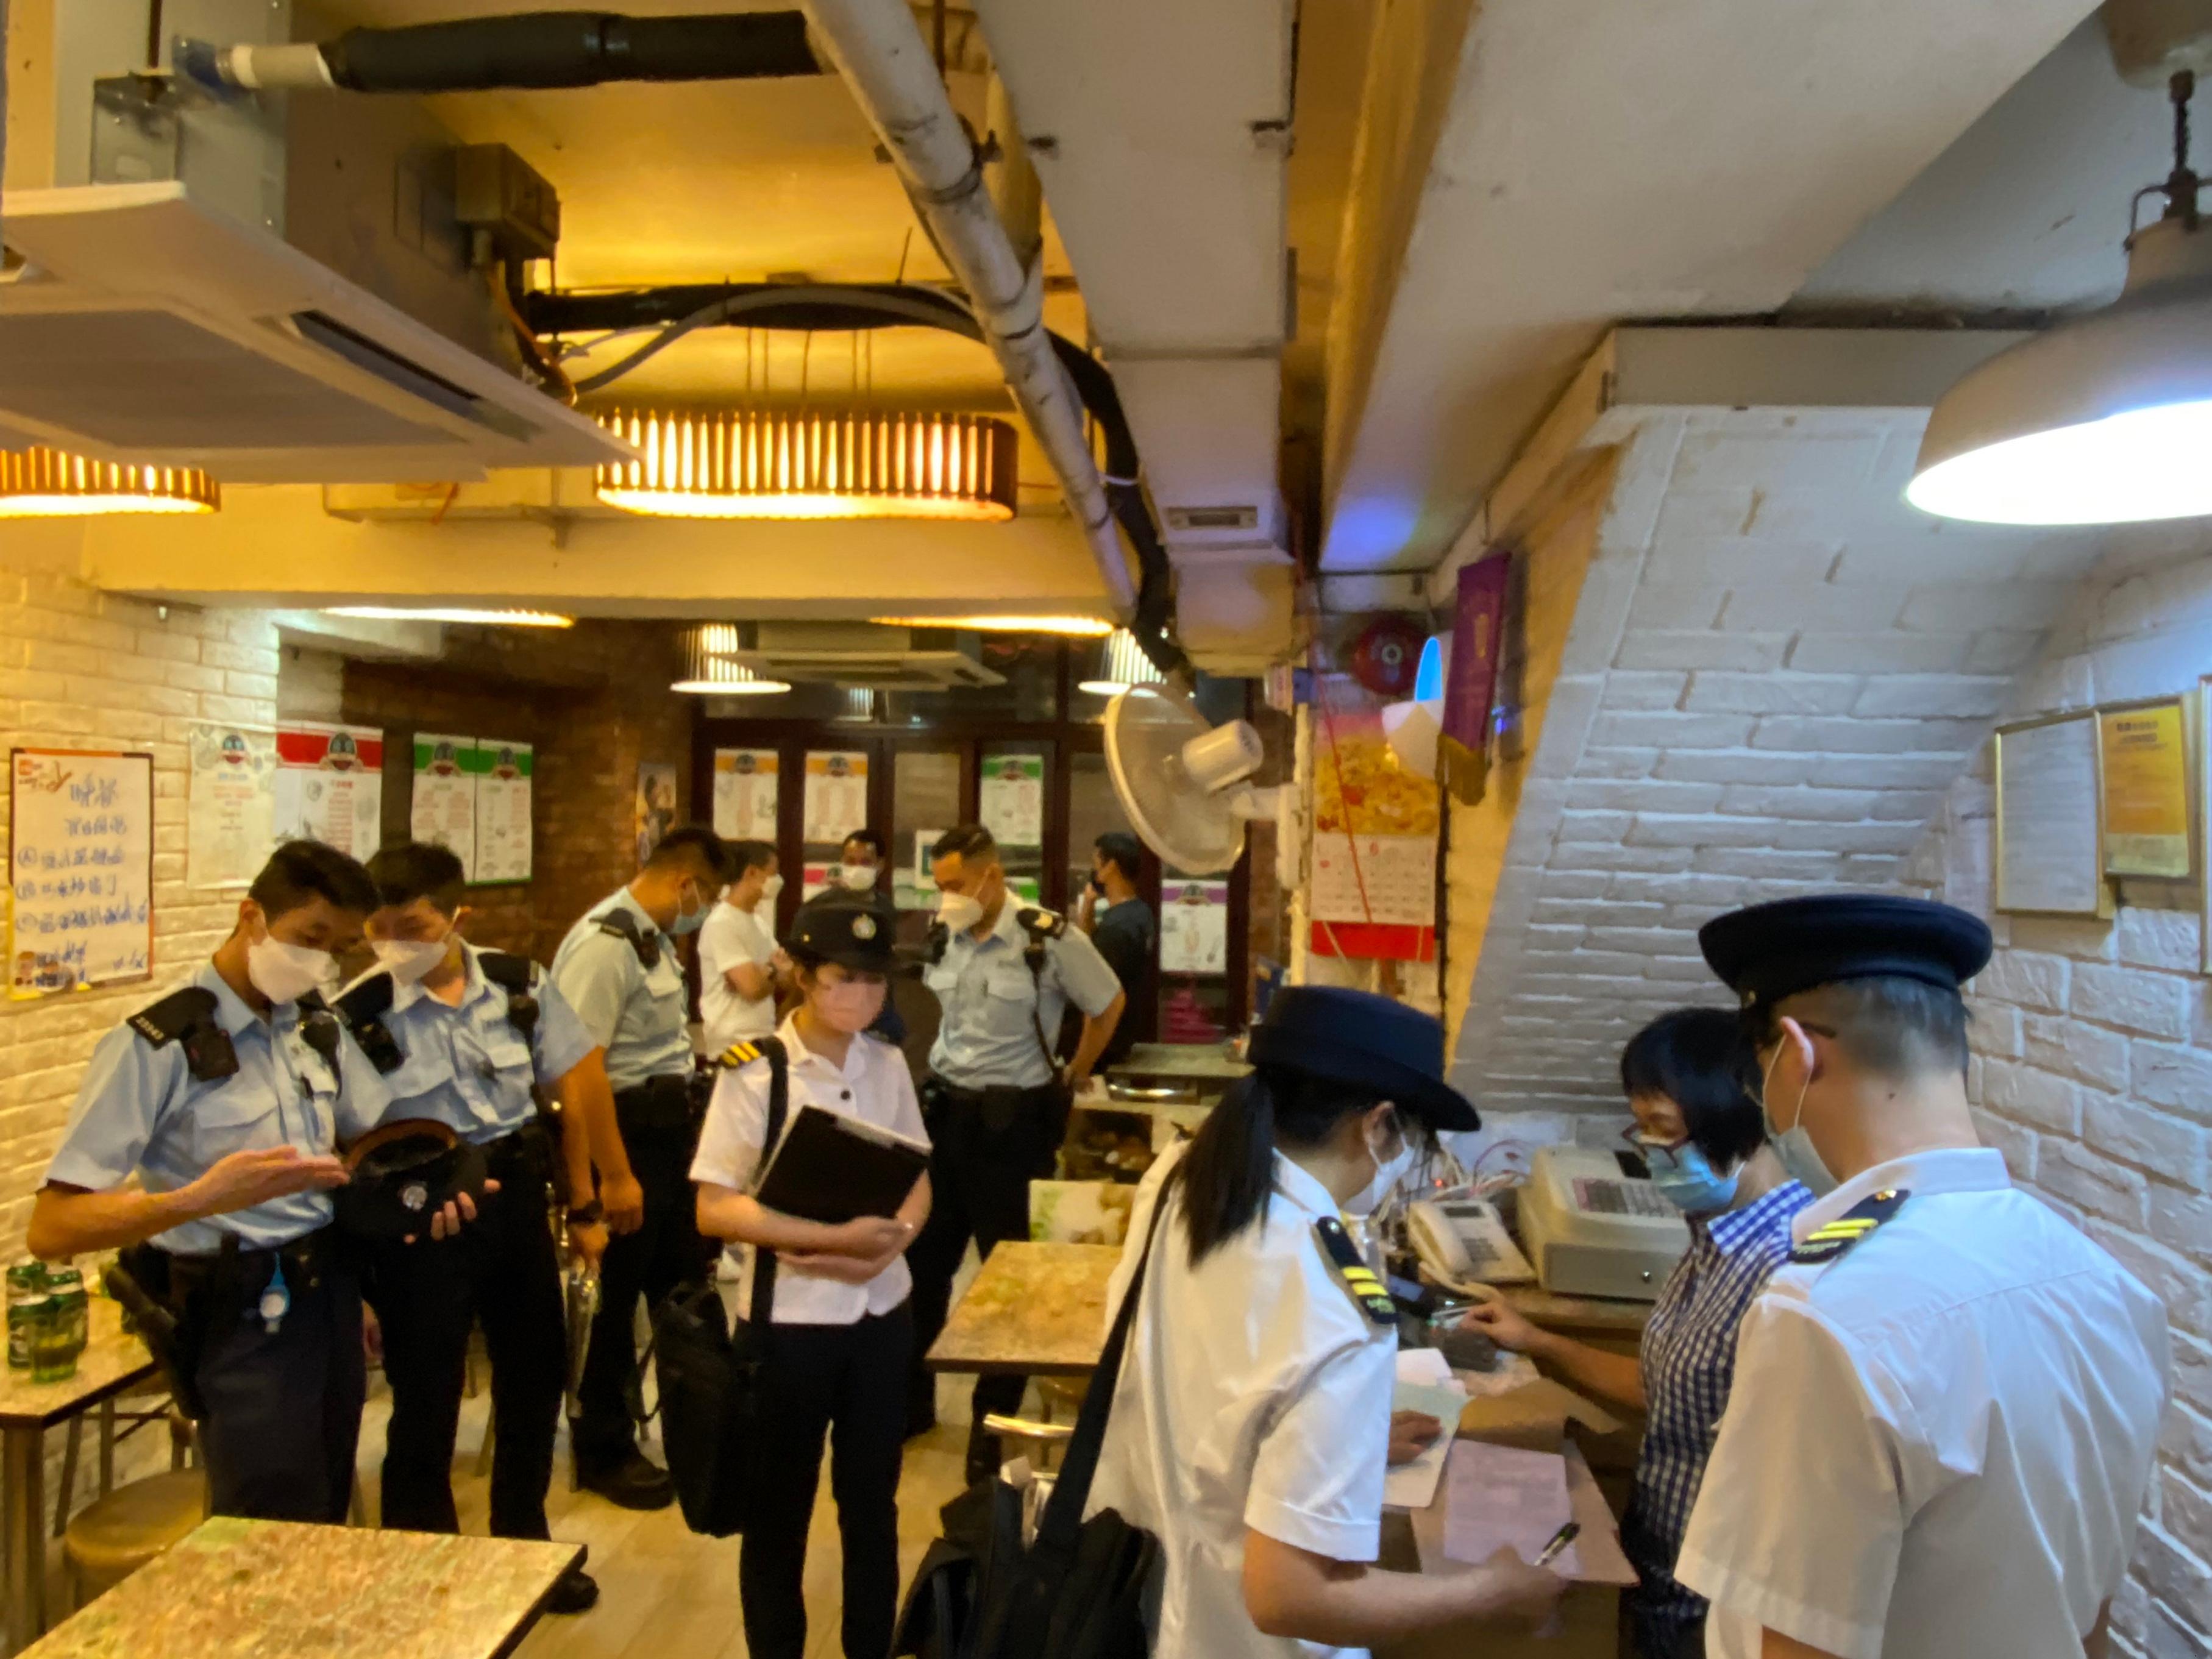 The Food and Environmental Hygiene Department conducted joint operations during the long weekend with the Police in Mong Kok and inspected catering premises.